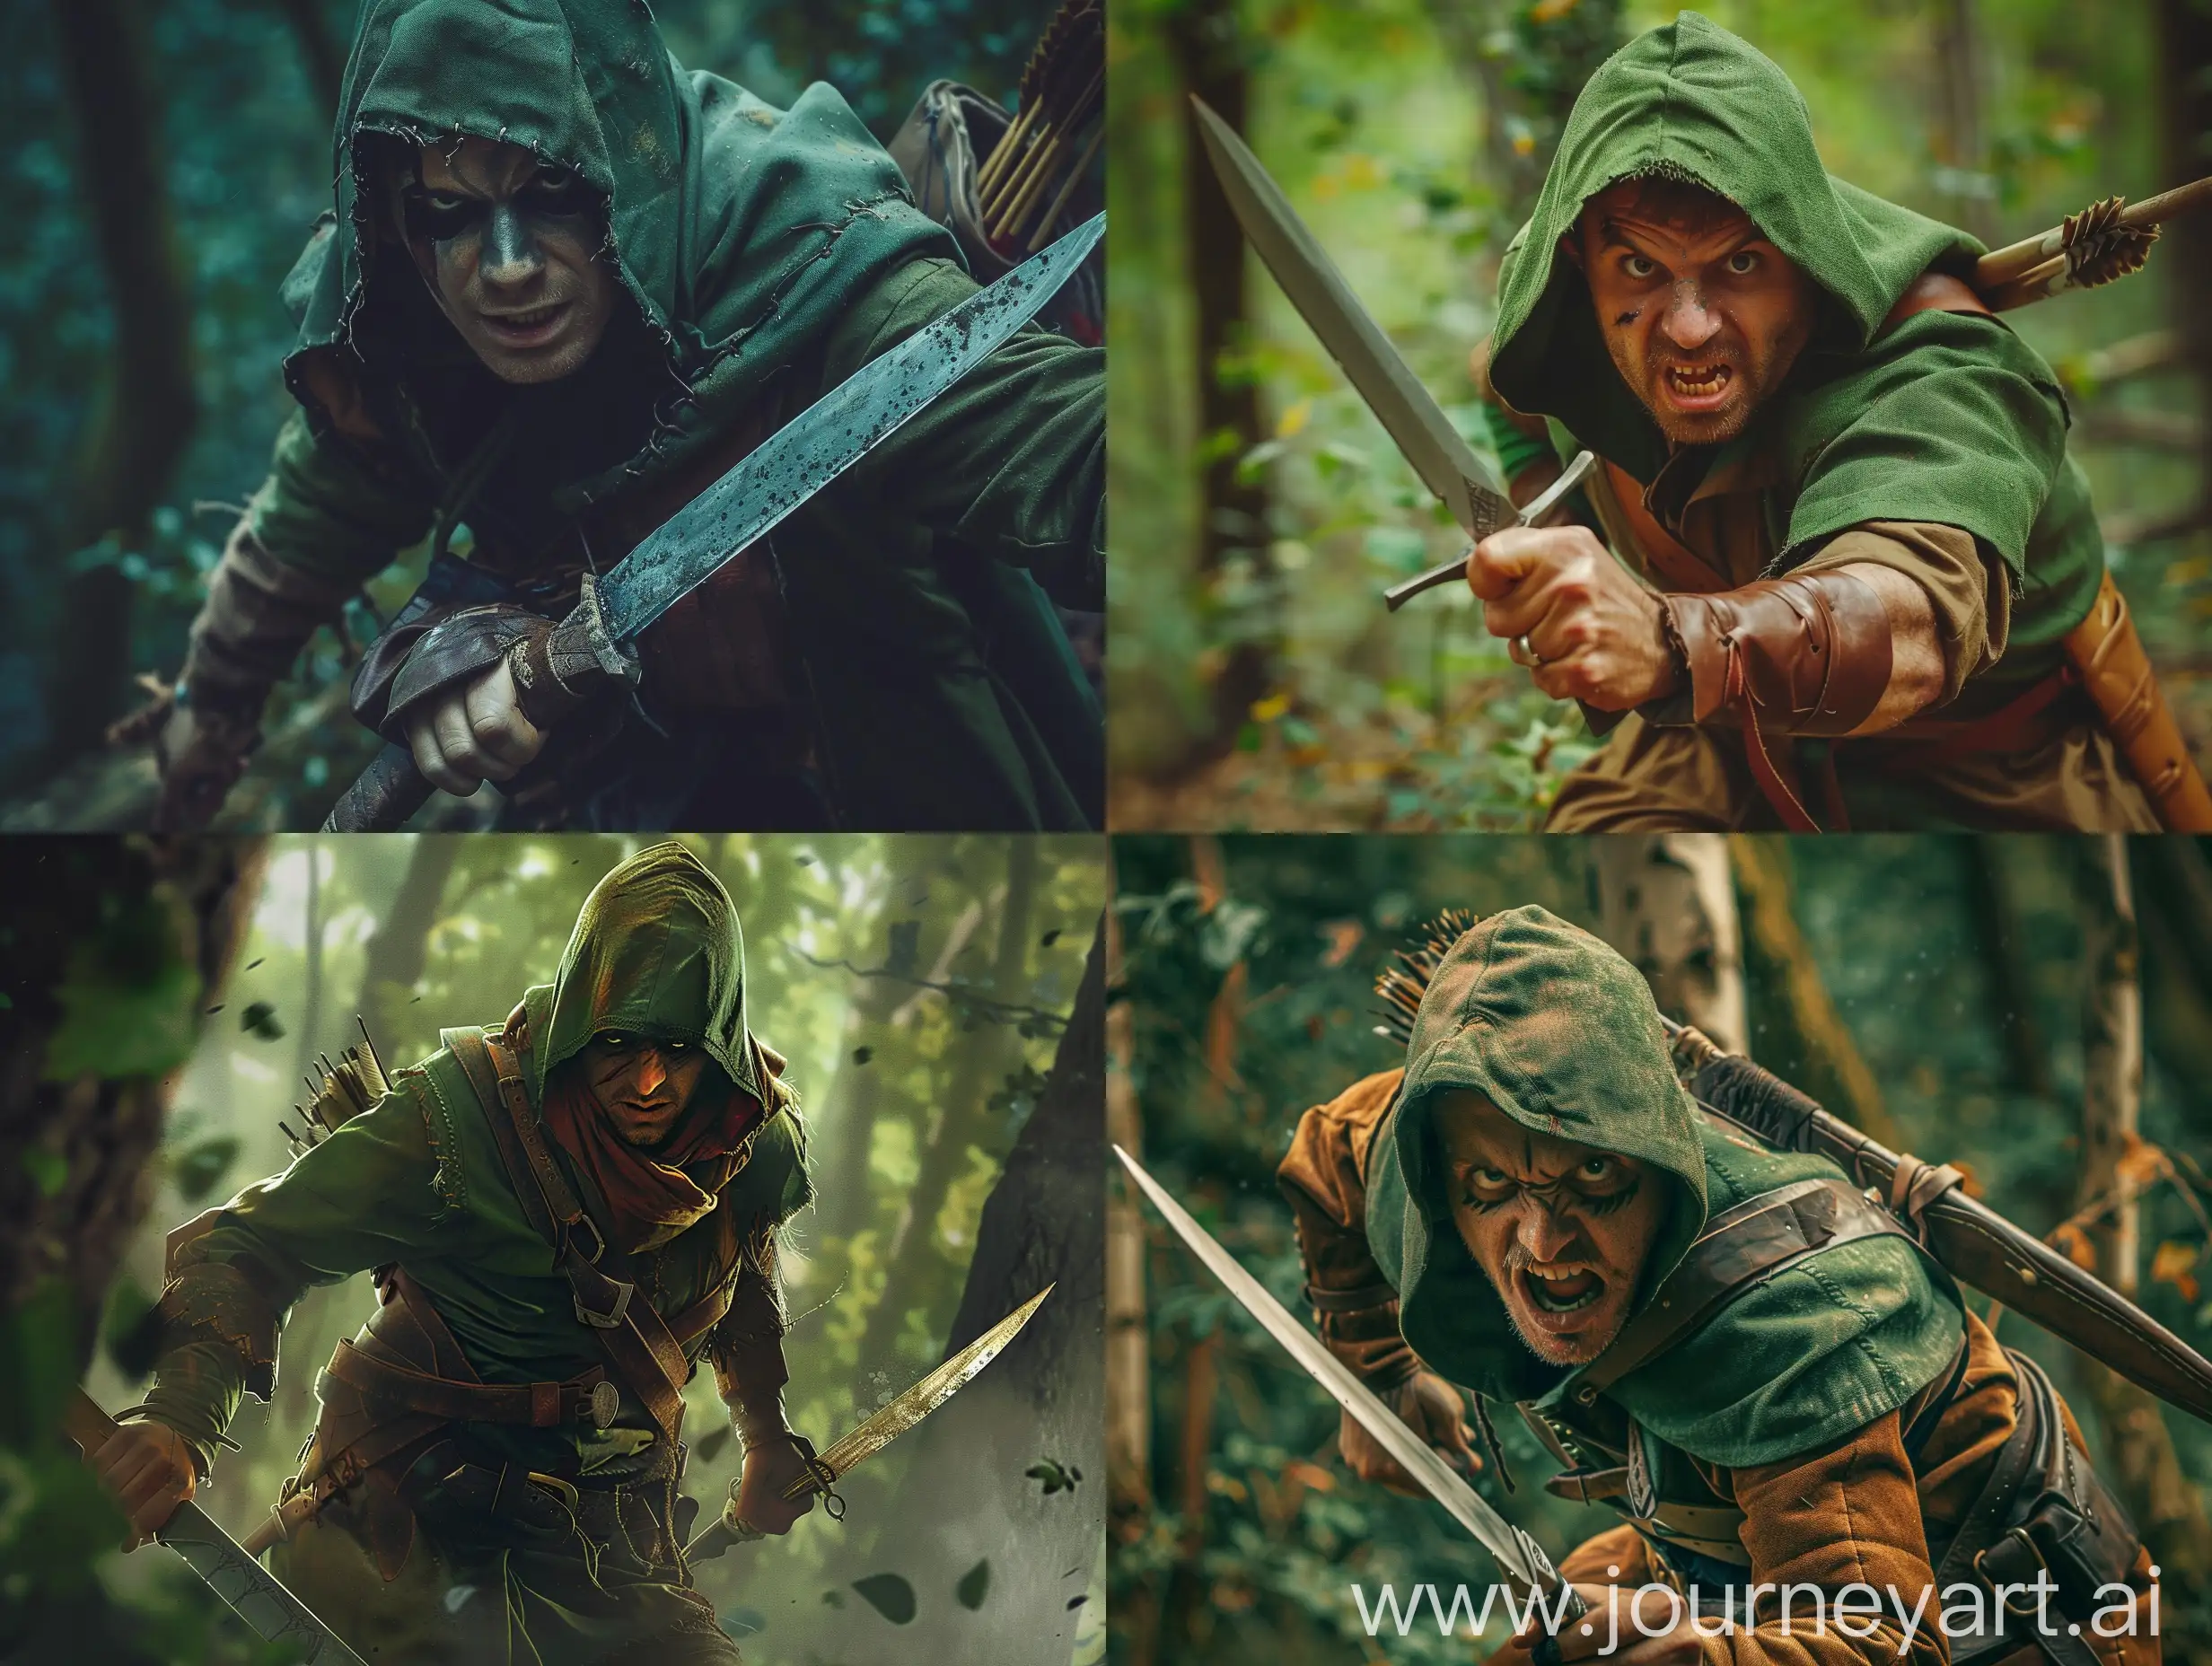 One is a killer hunter dressed like Robin Hood with a knife in his hand. Fierce face. Searching the forest.